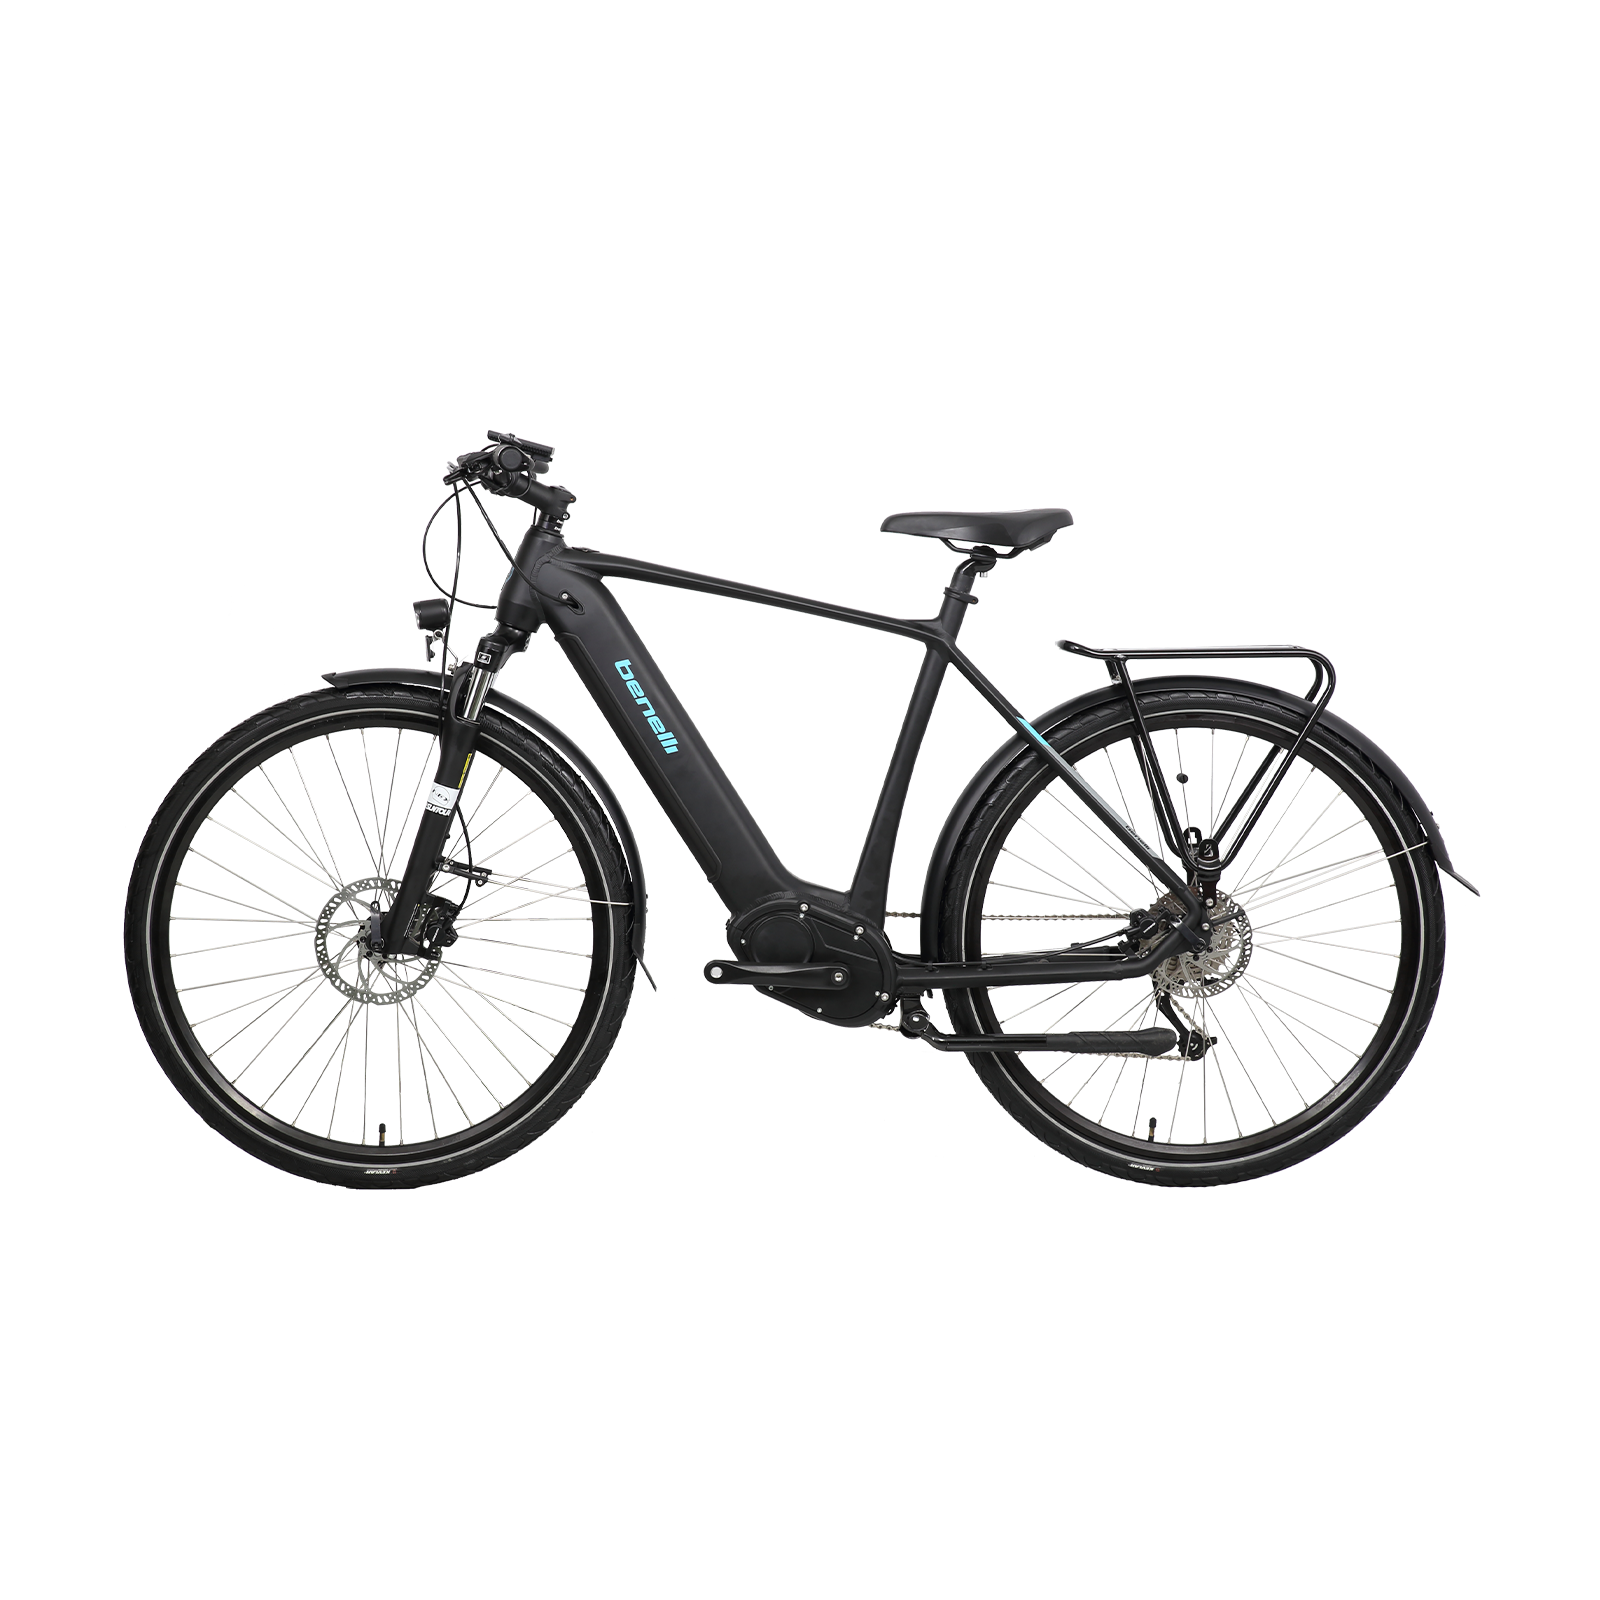 Refurbished Benelli eBike Bravo (Only available Sydney area, self pick-up only）